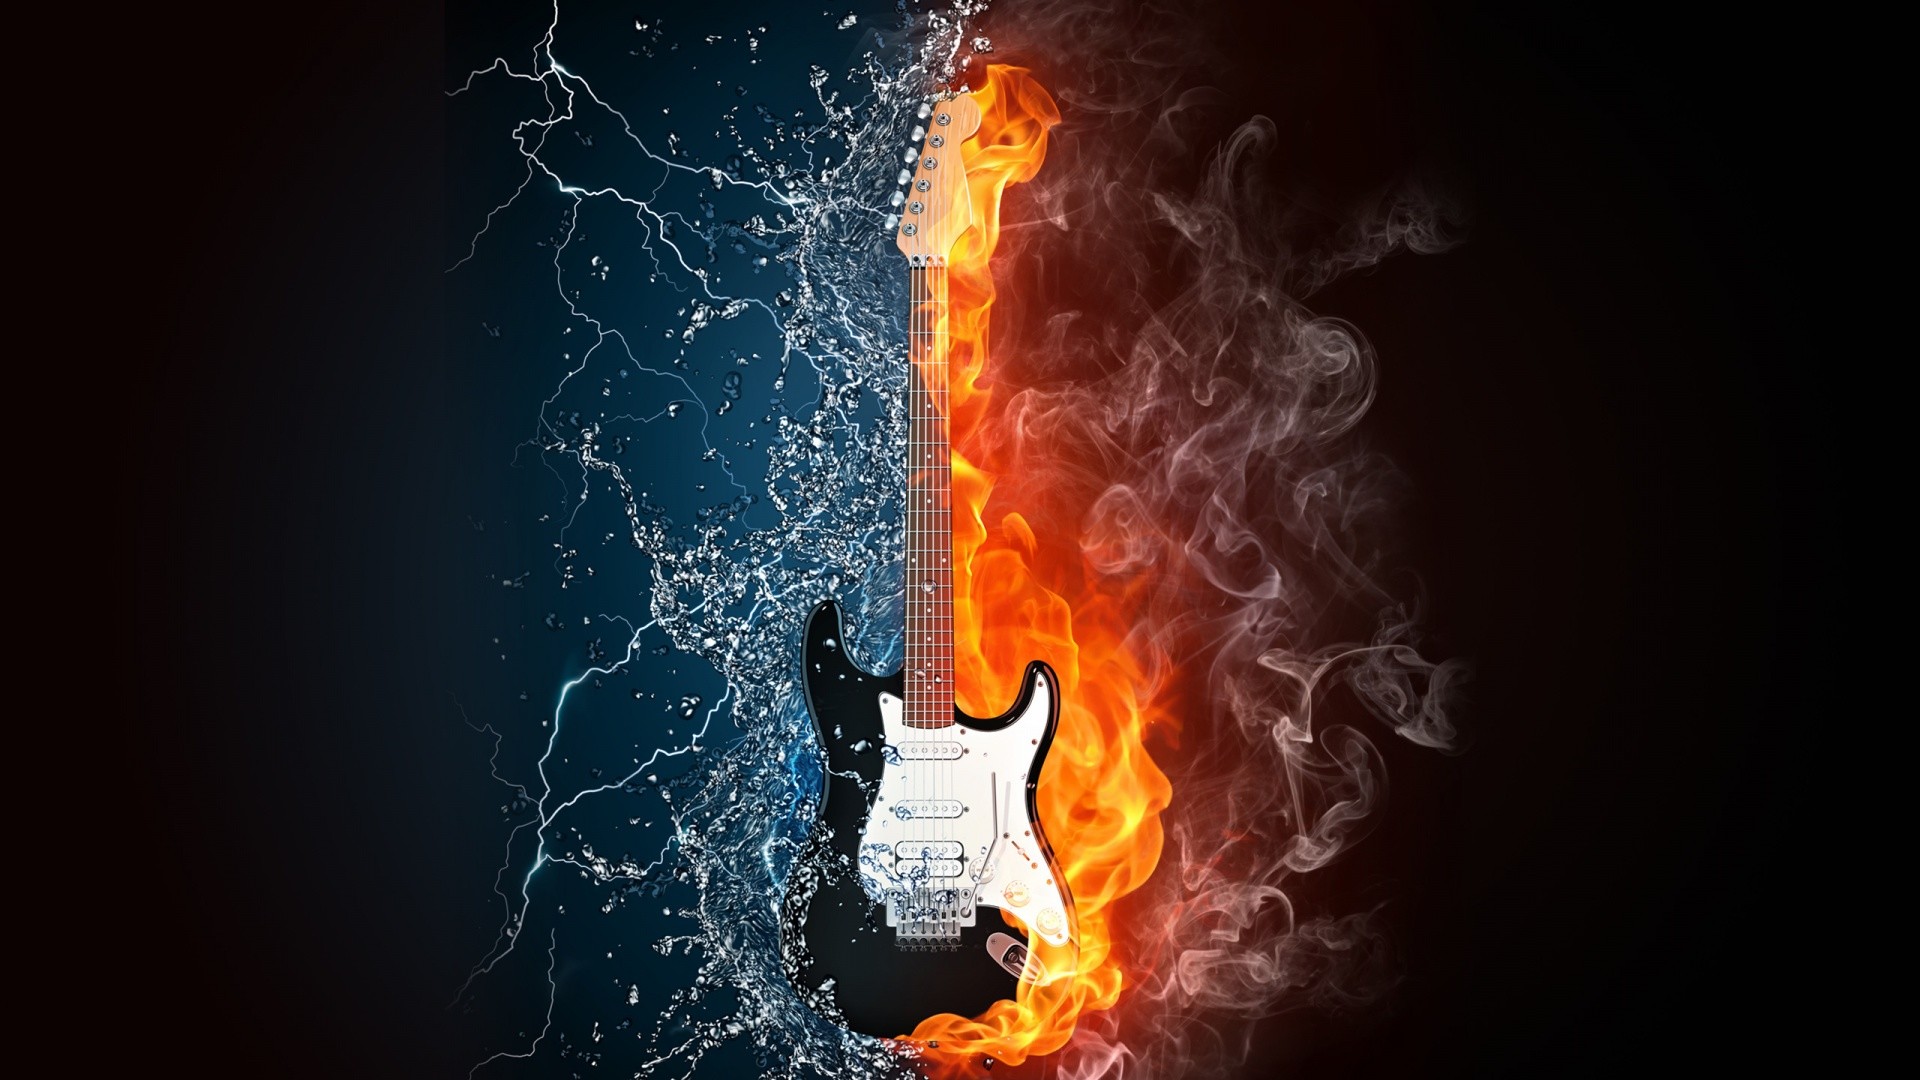 1920x1080 Cool Fire And Water Guitar Image Hd Wallpaper